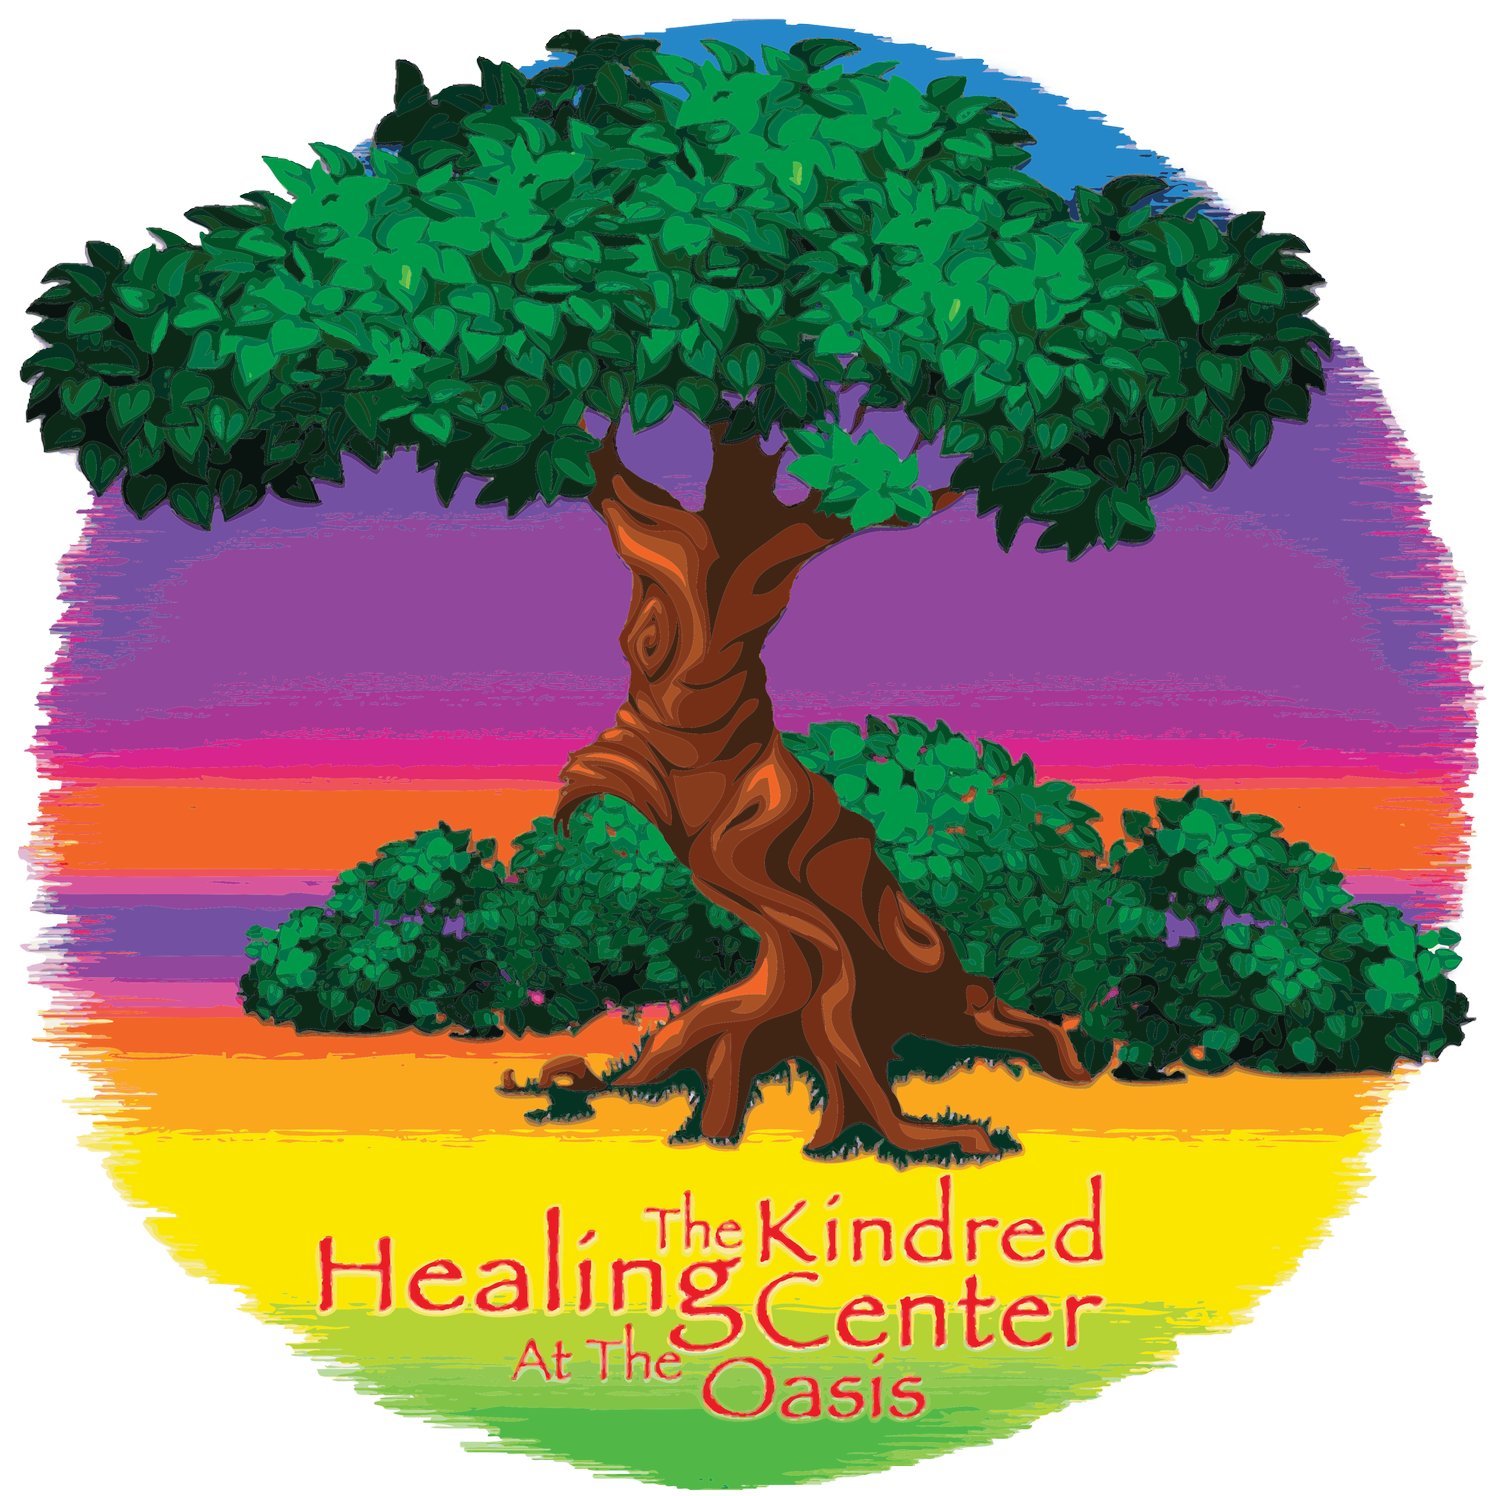 The Kindred Healing Center